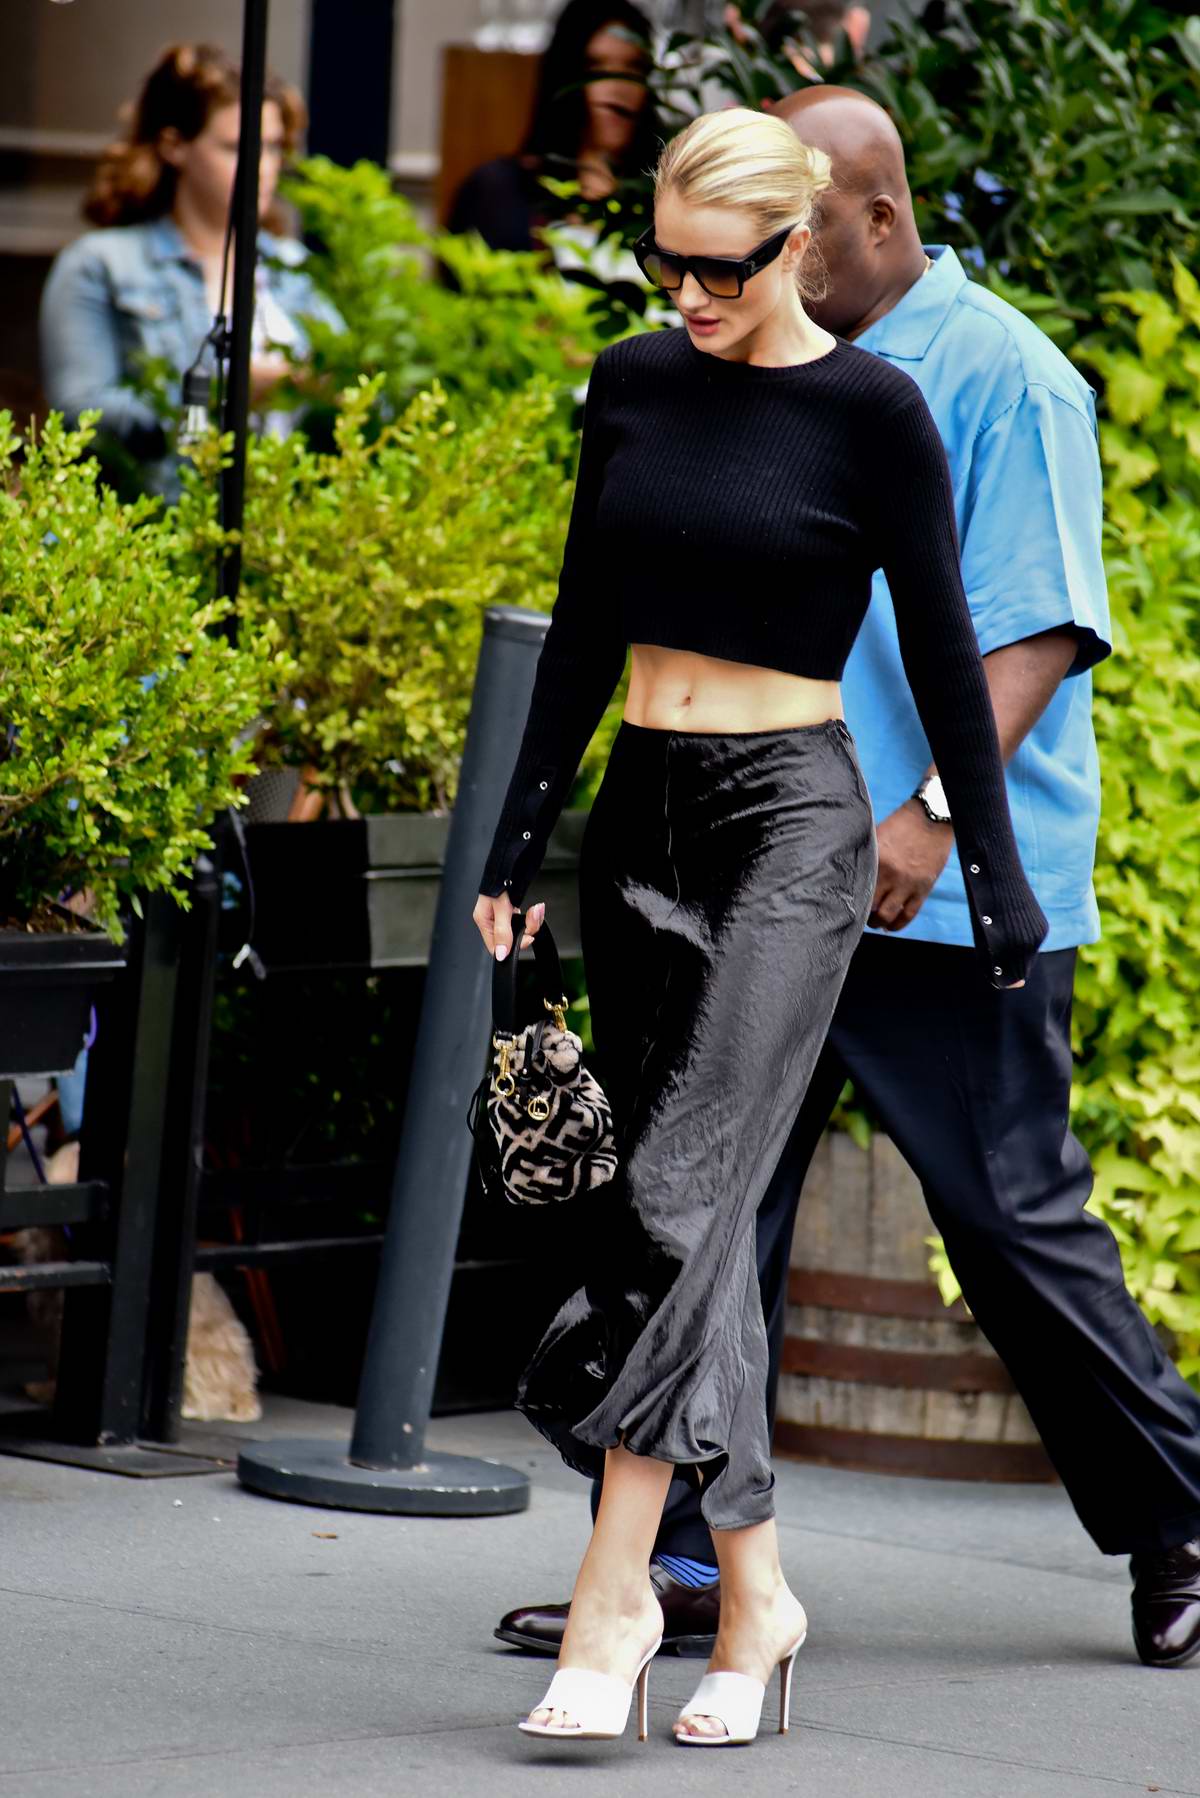 Rosie Huntington-Whitely's Black Crop Top, Skirt, and Fendi Bucket Bag Look  for Less - The Budget Babe